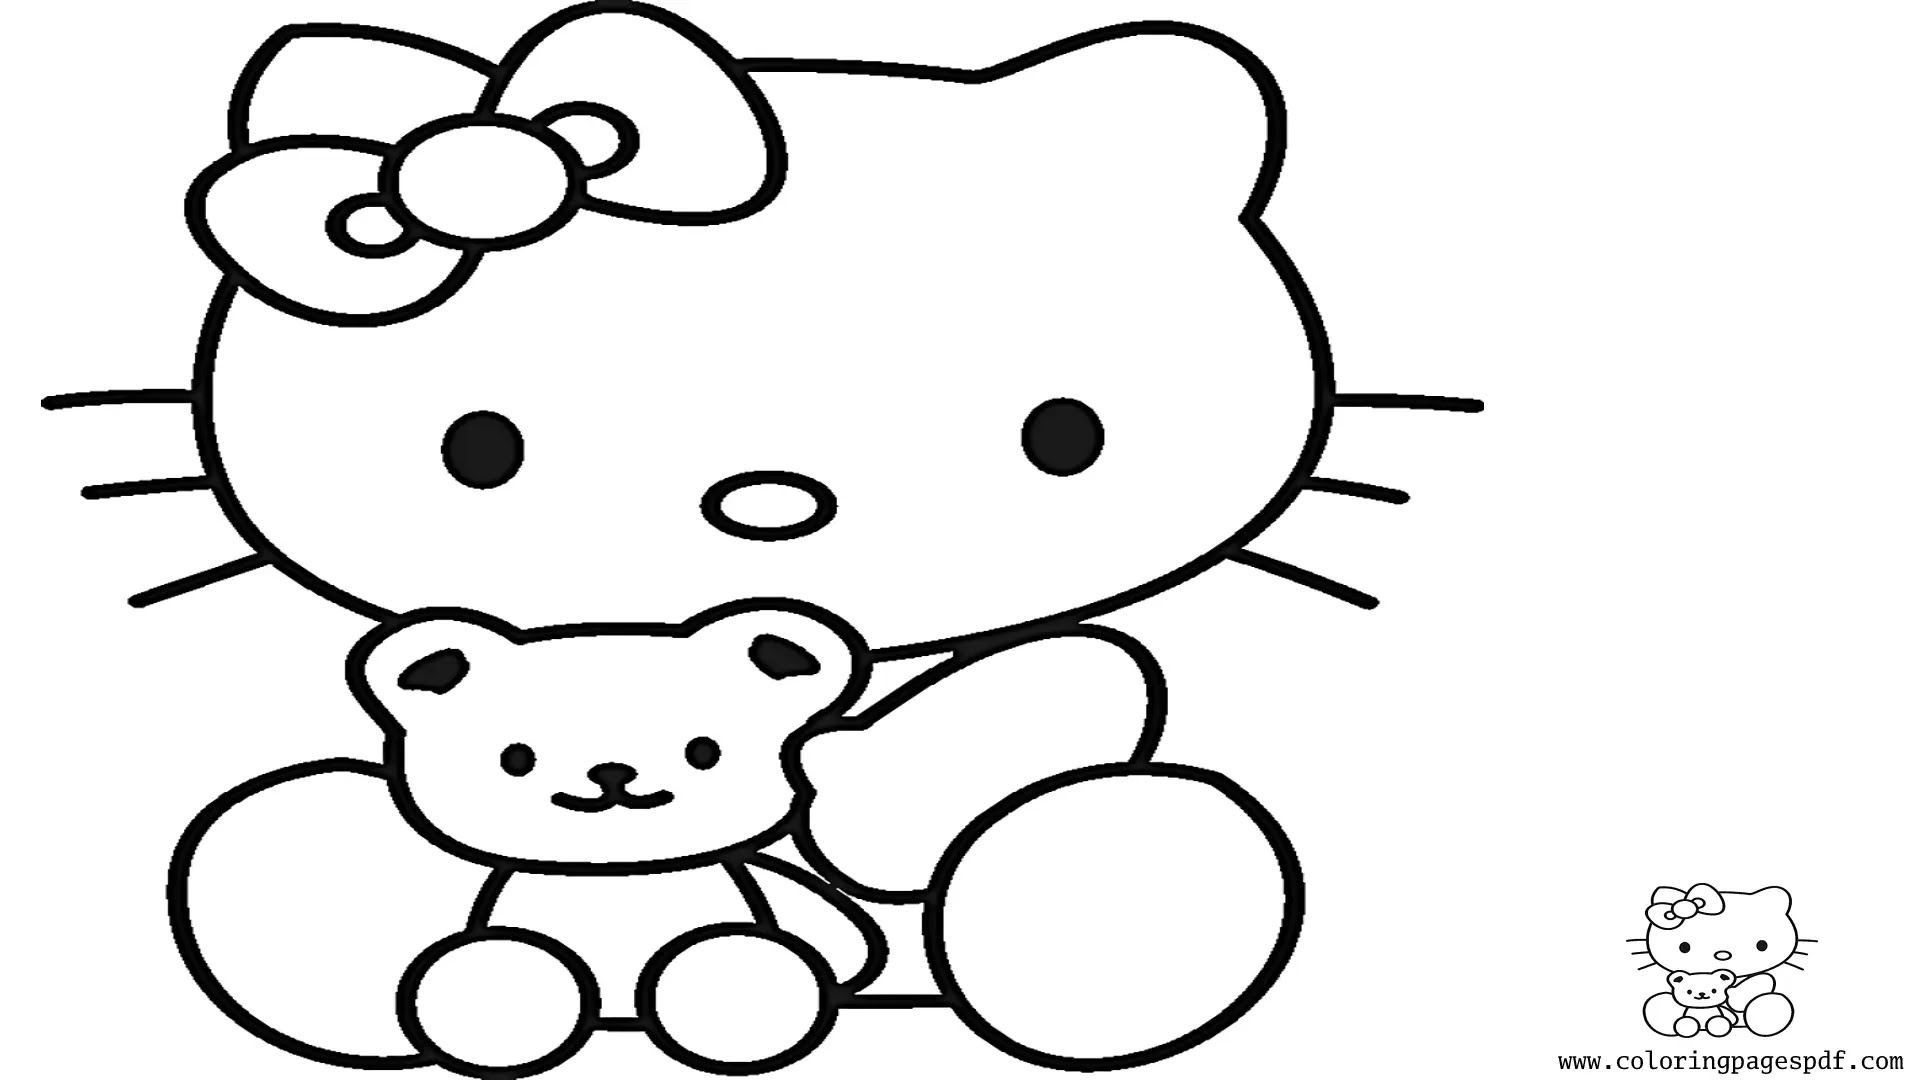 Coloring Page Of Hello Kitty Holding A Teddy Bear